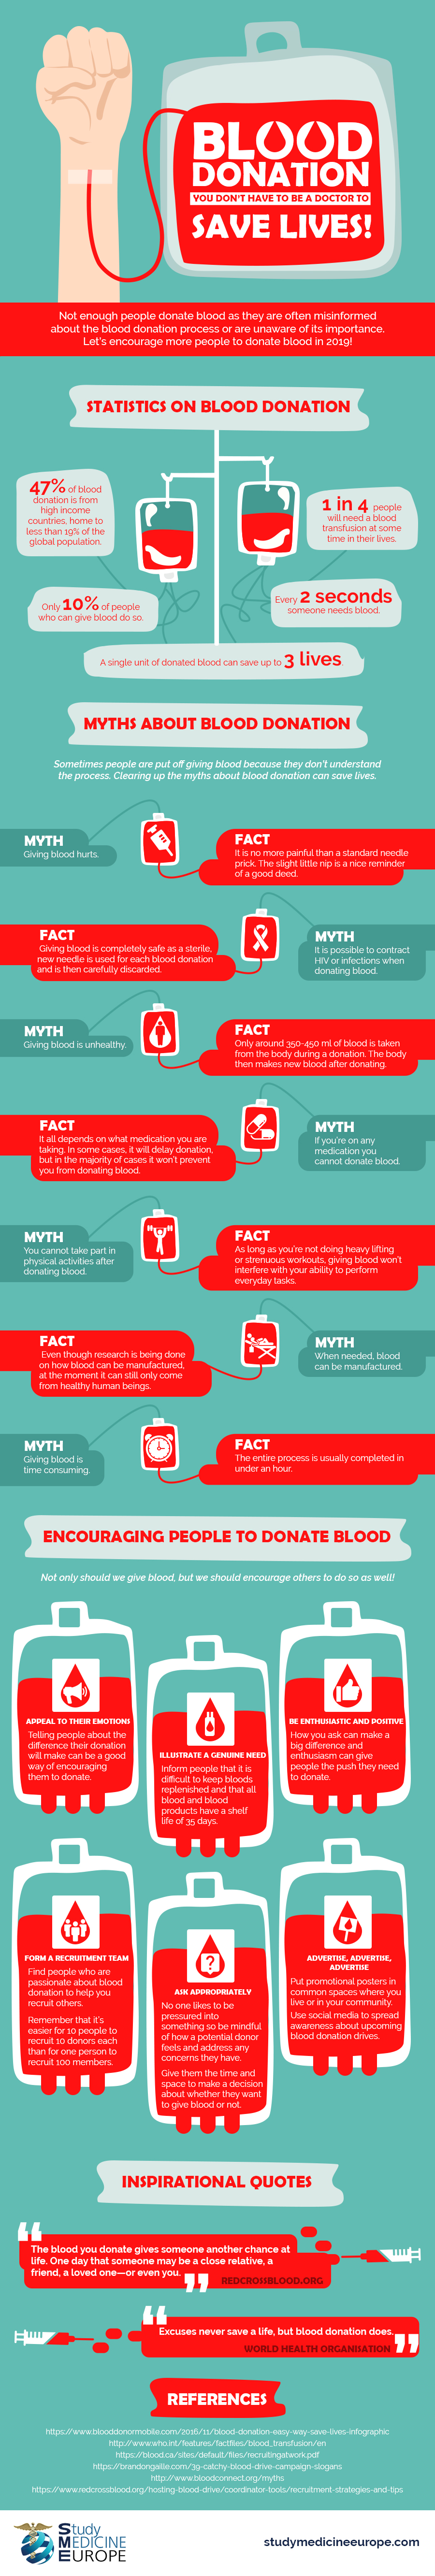 Blood Donation - You Don't Have to be Doctor to Save Lives (Infographic)